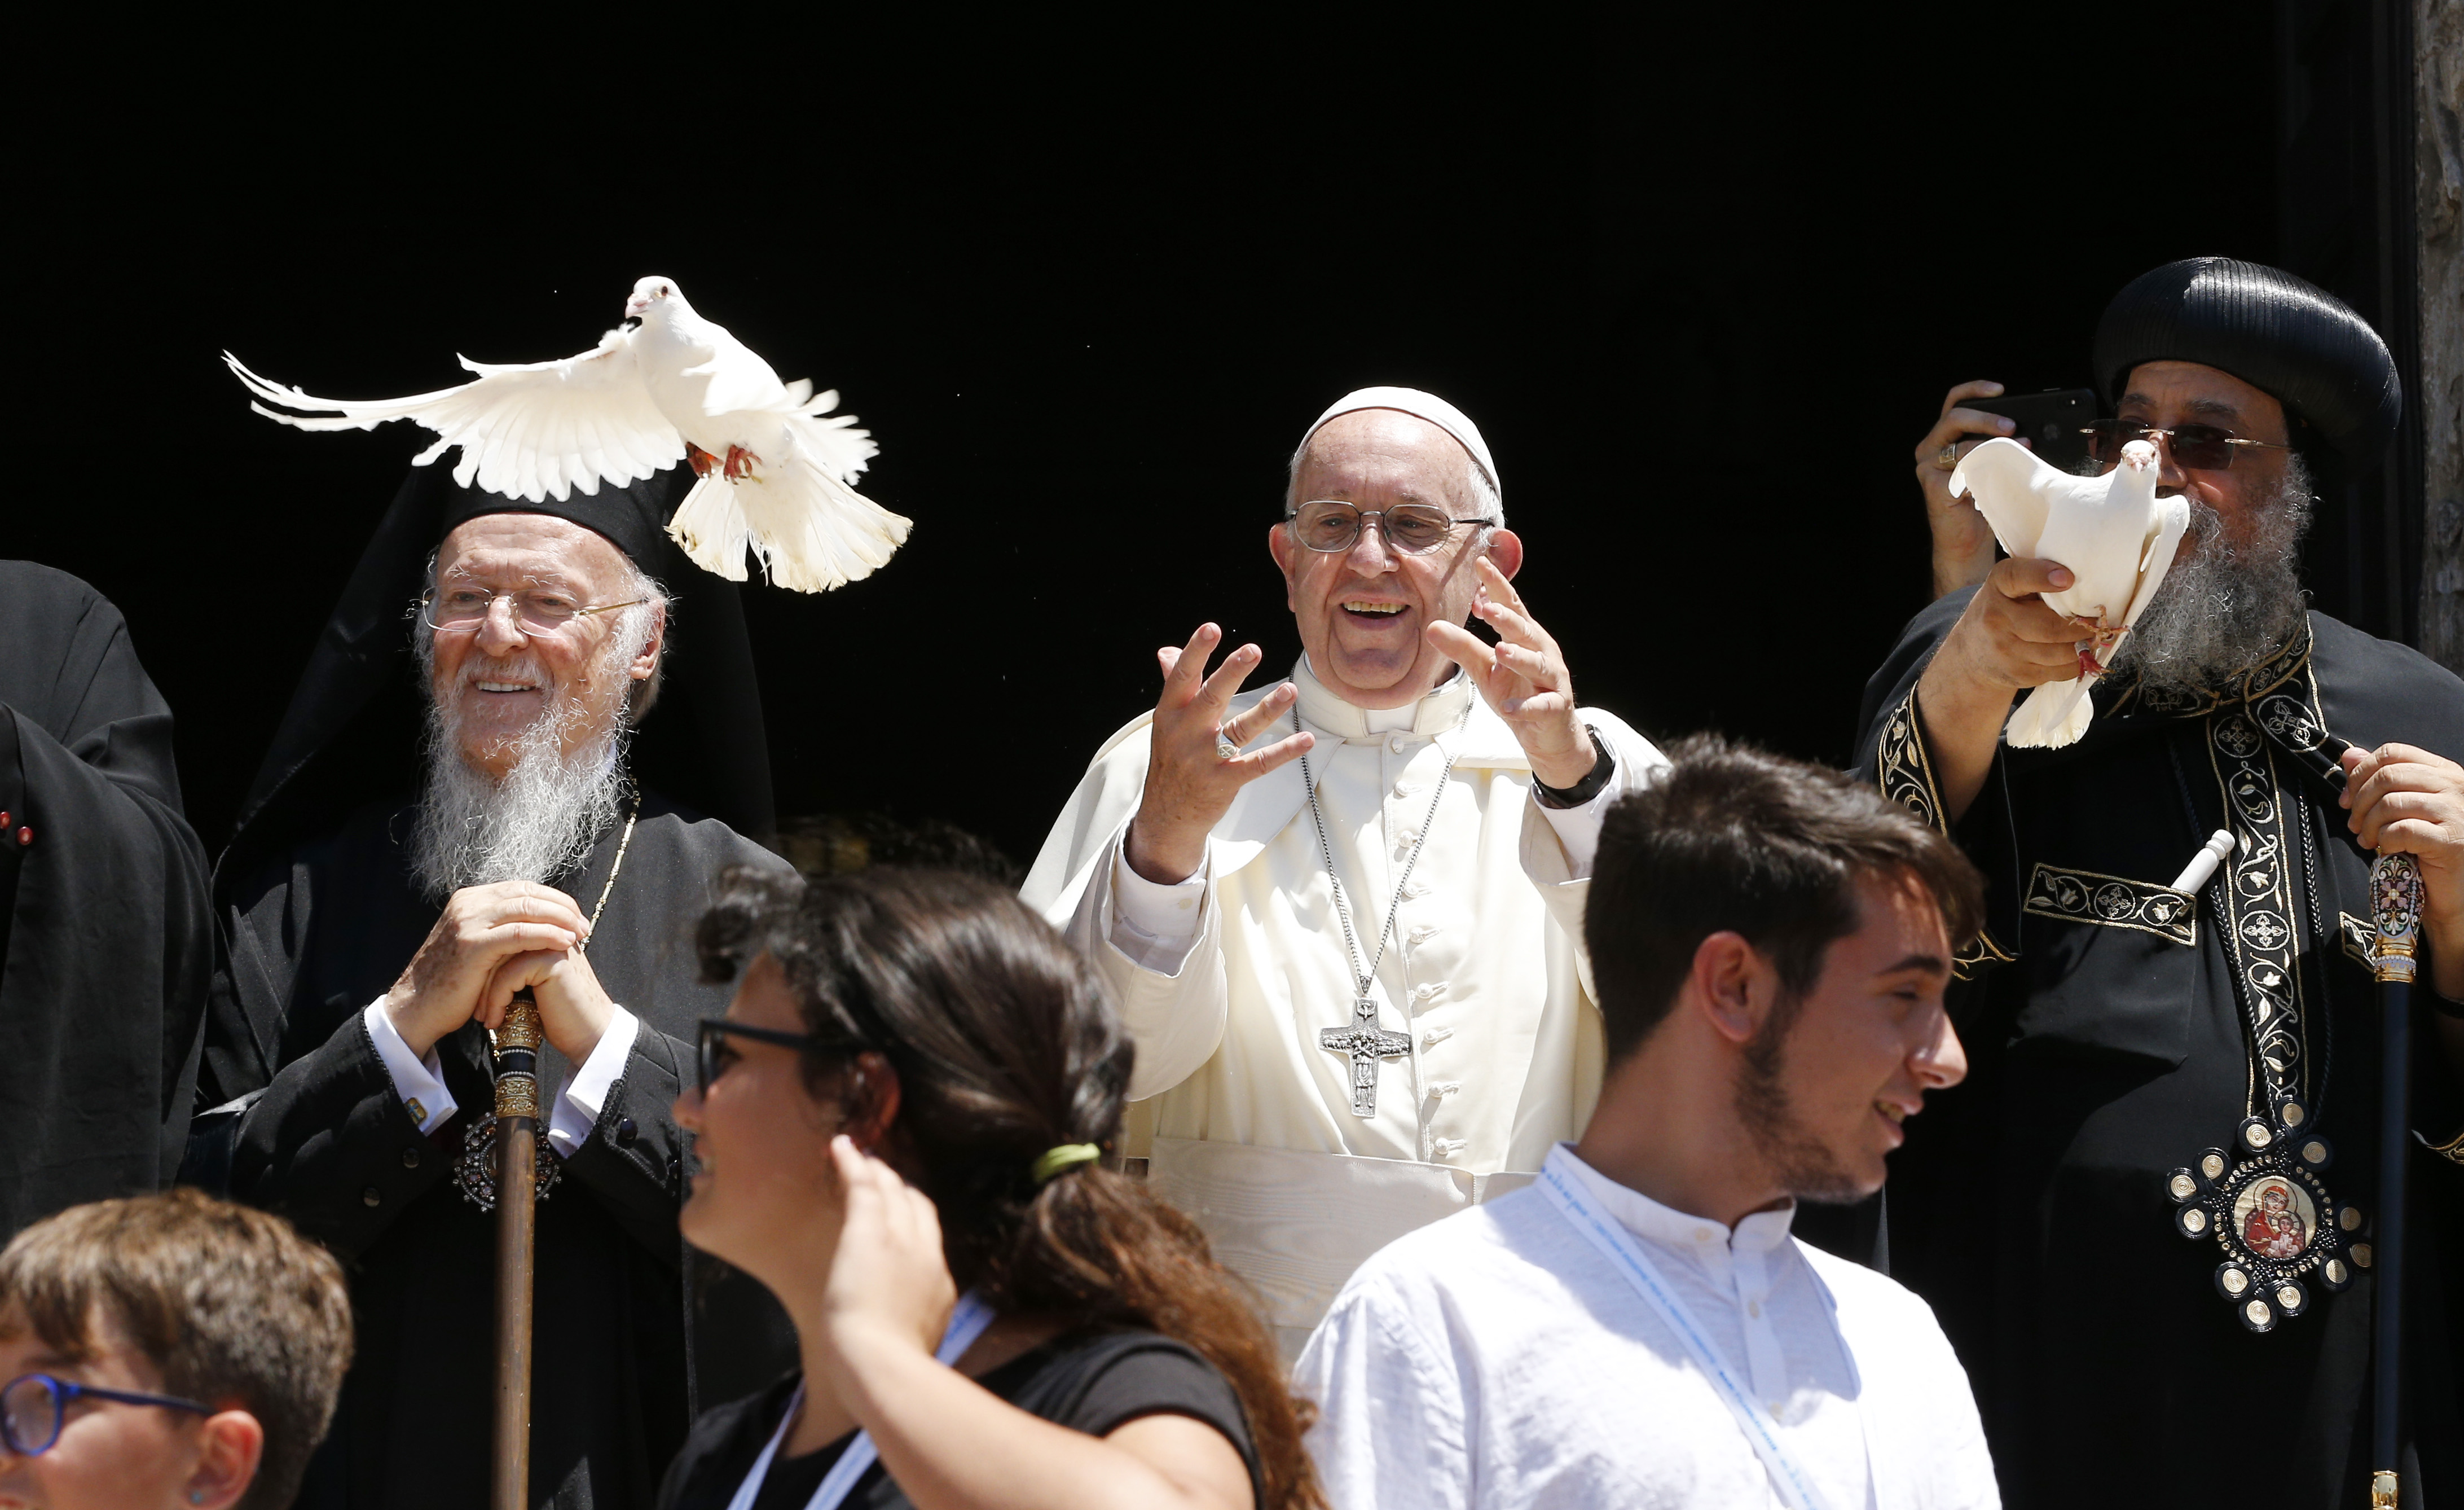 Pope Francis prays that out of discord will come peace